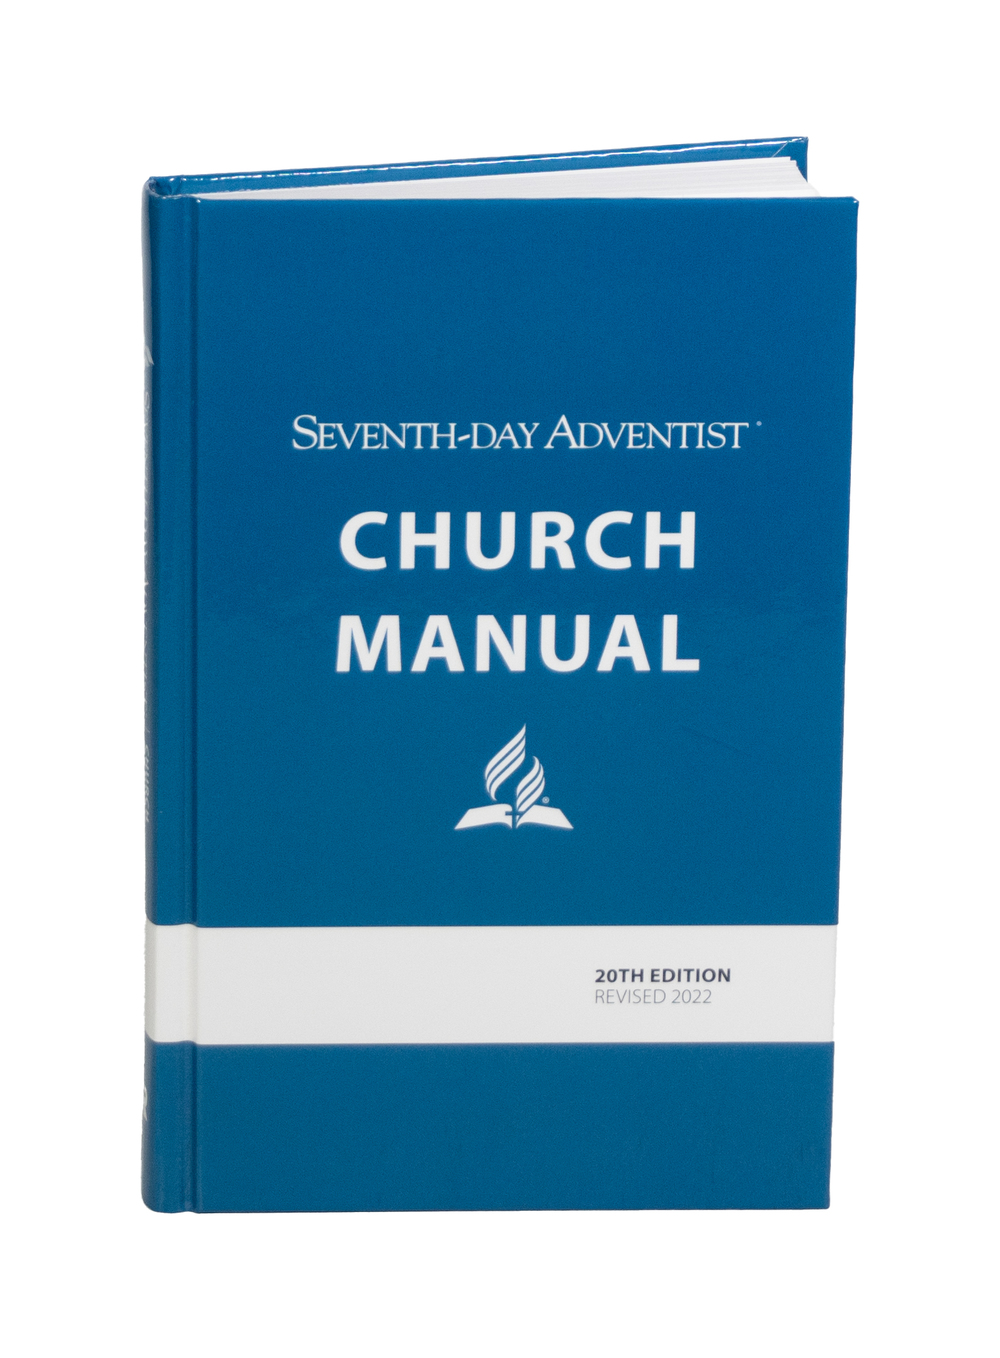 Seventh-day Adventist Church Manual | Hard back Revised 2022